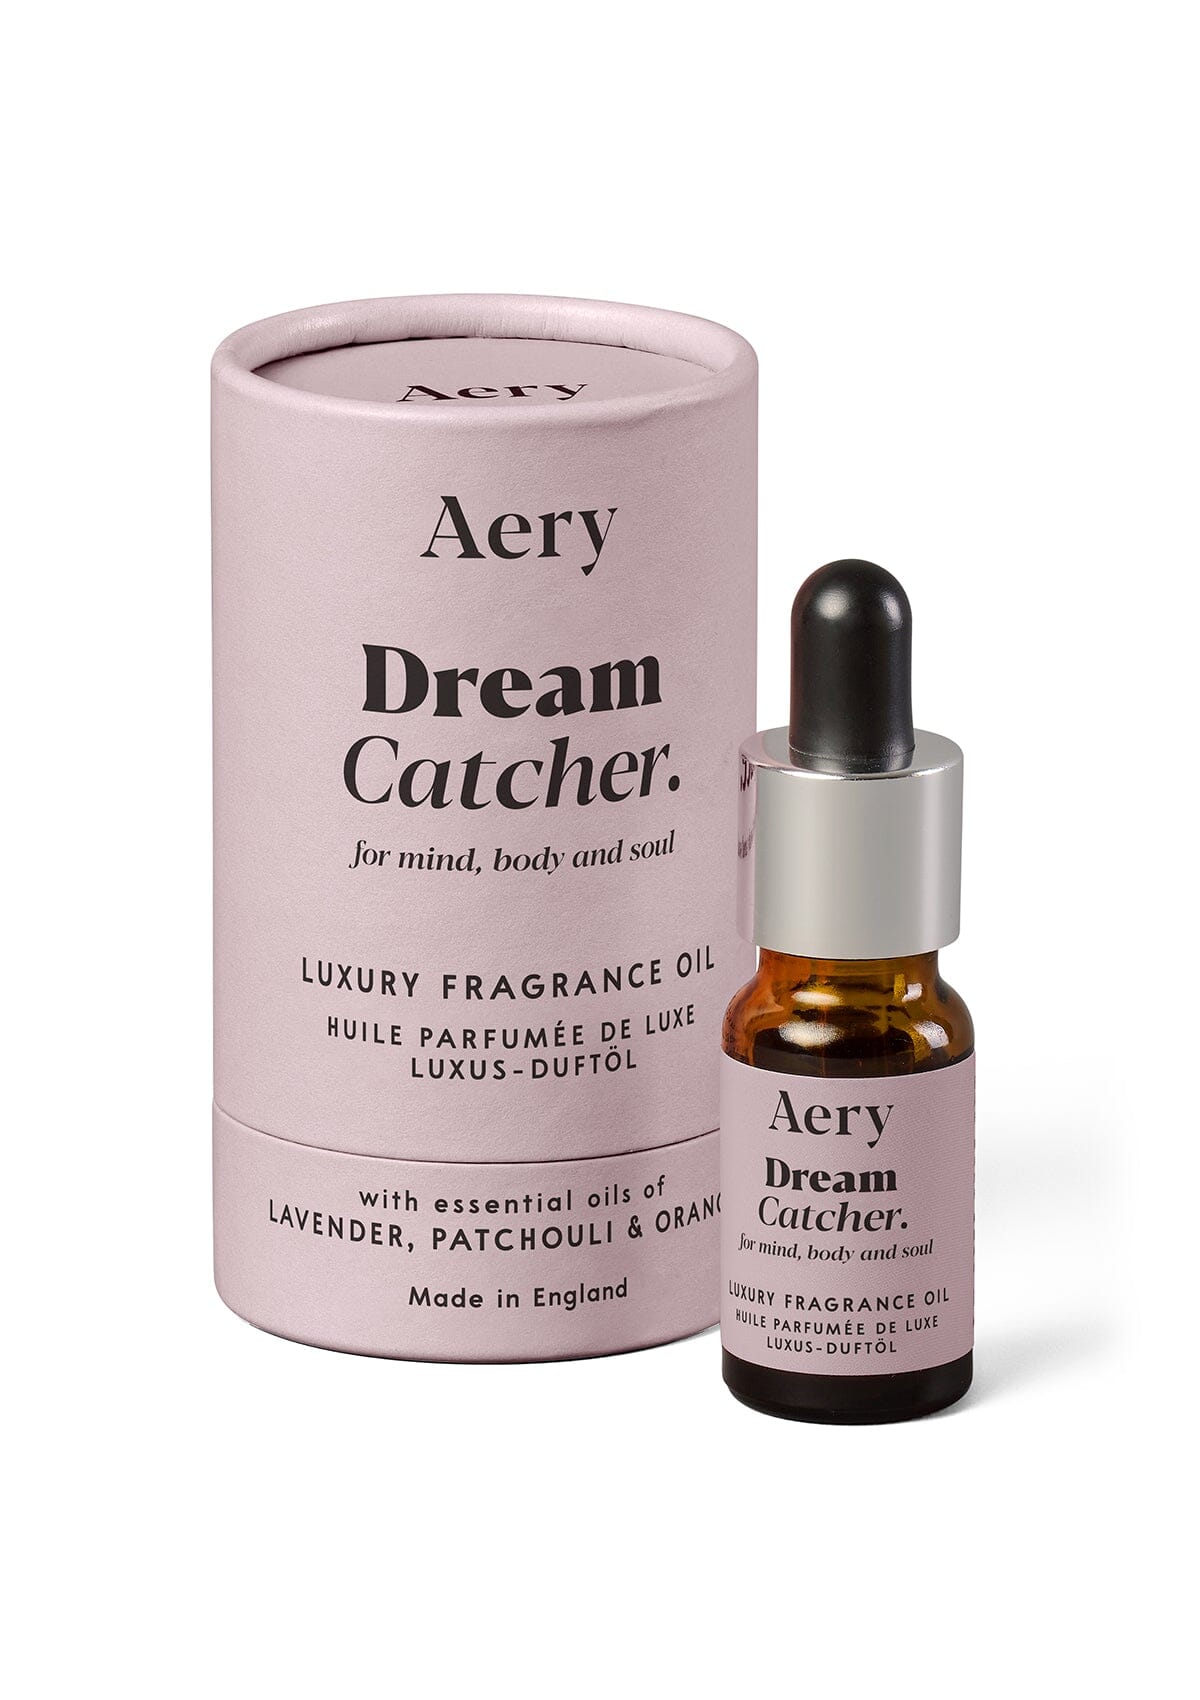 Lilac Dream Catcher fragrance oil displayed next to product packaging by Aery on white background 